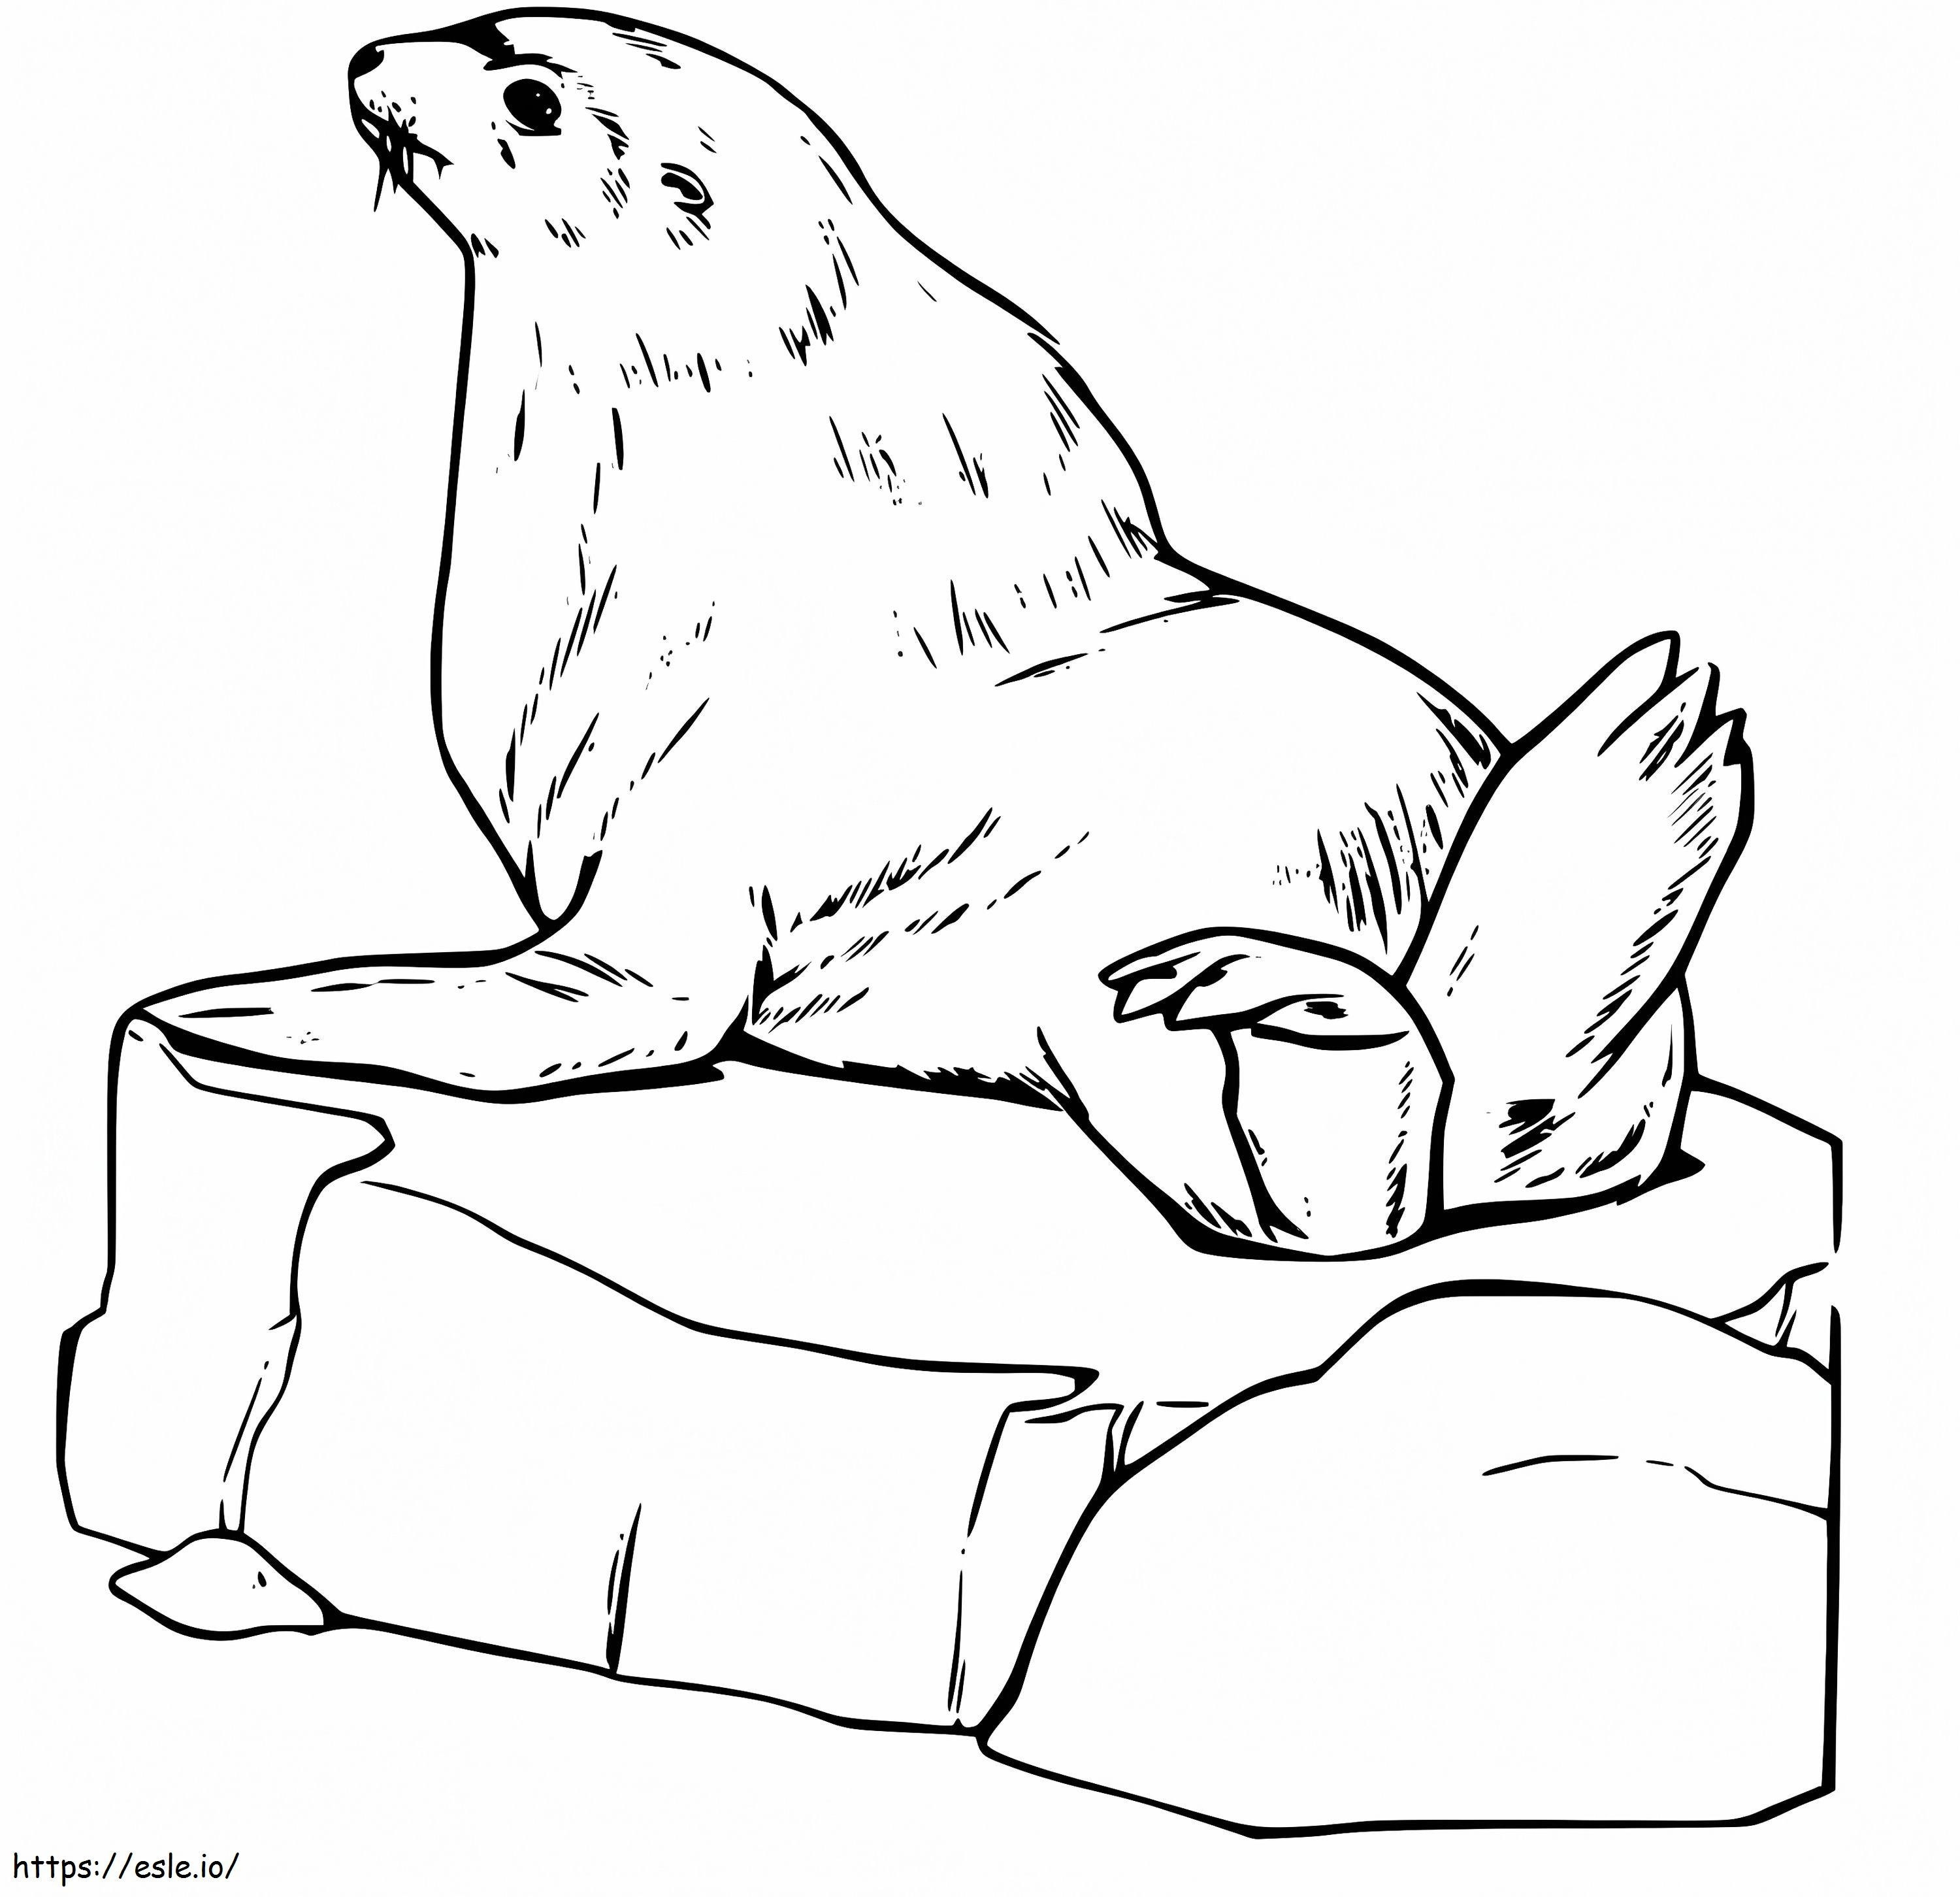 A Sea Lion On Ice coloring page